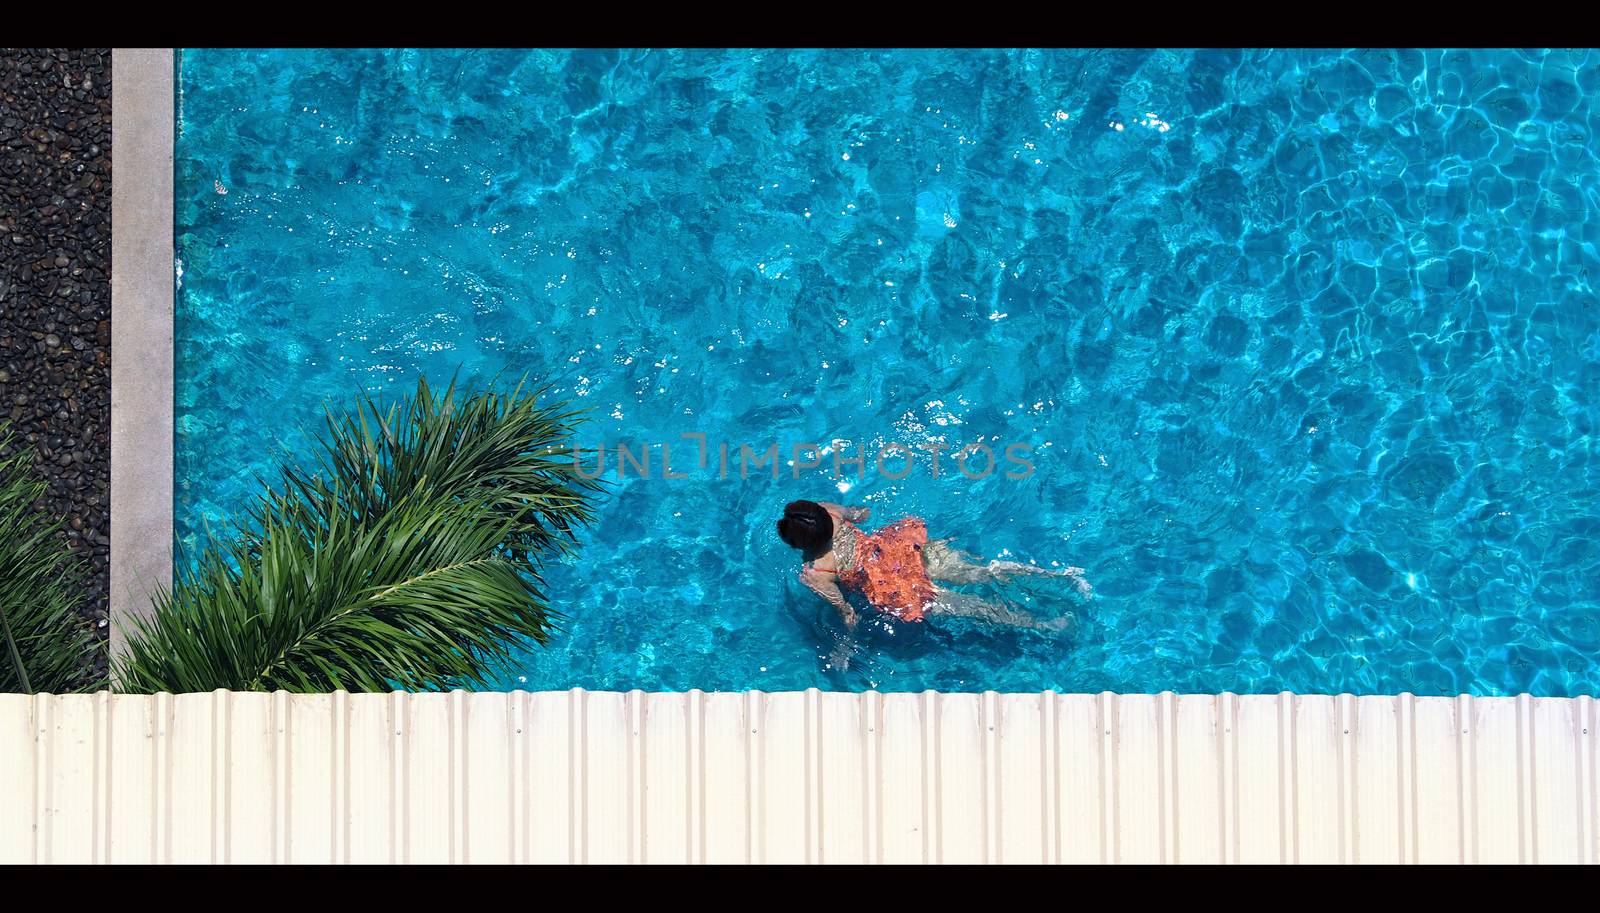 Swimming pool top view angle blue color clear water  by gnepphoto